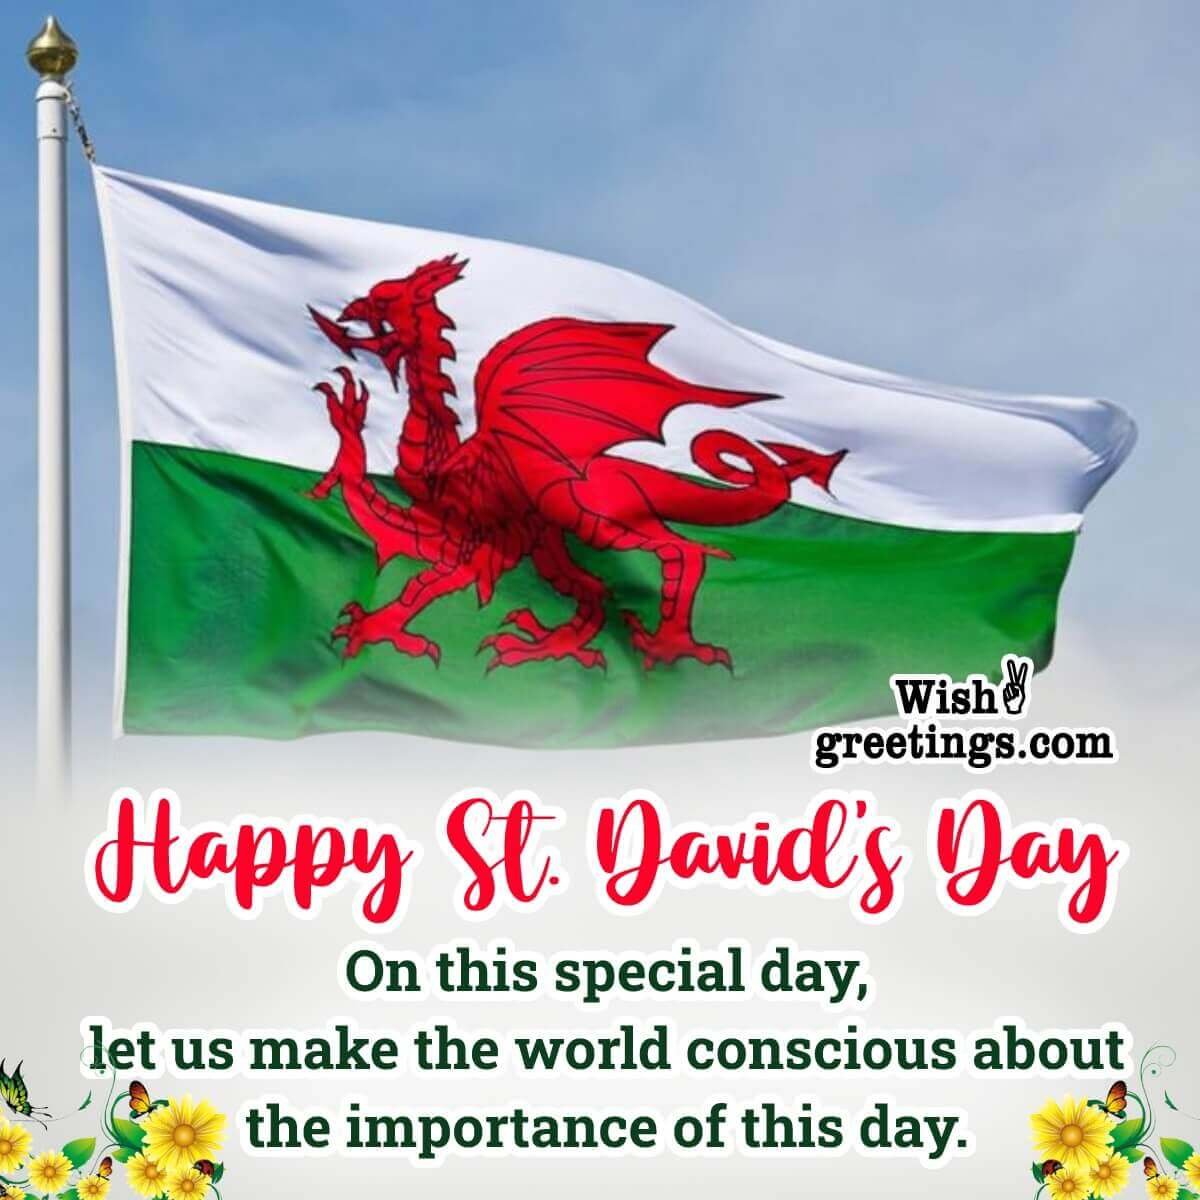 Happy St. David’s Day Message Image